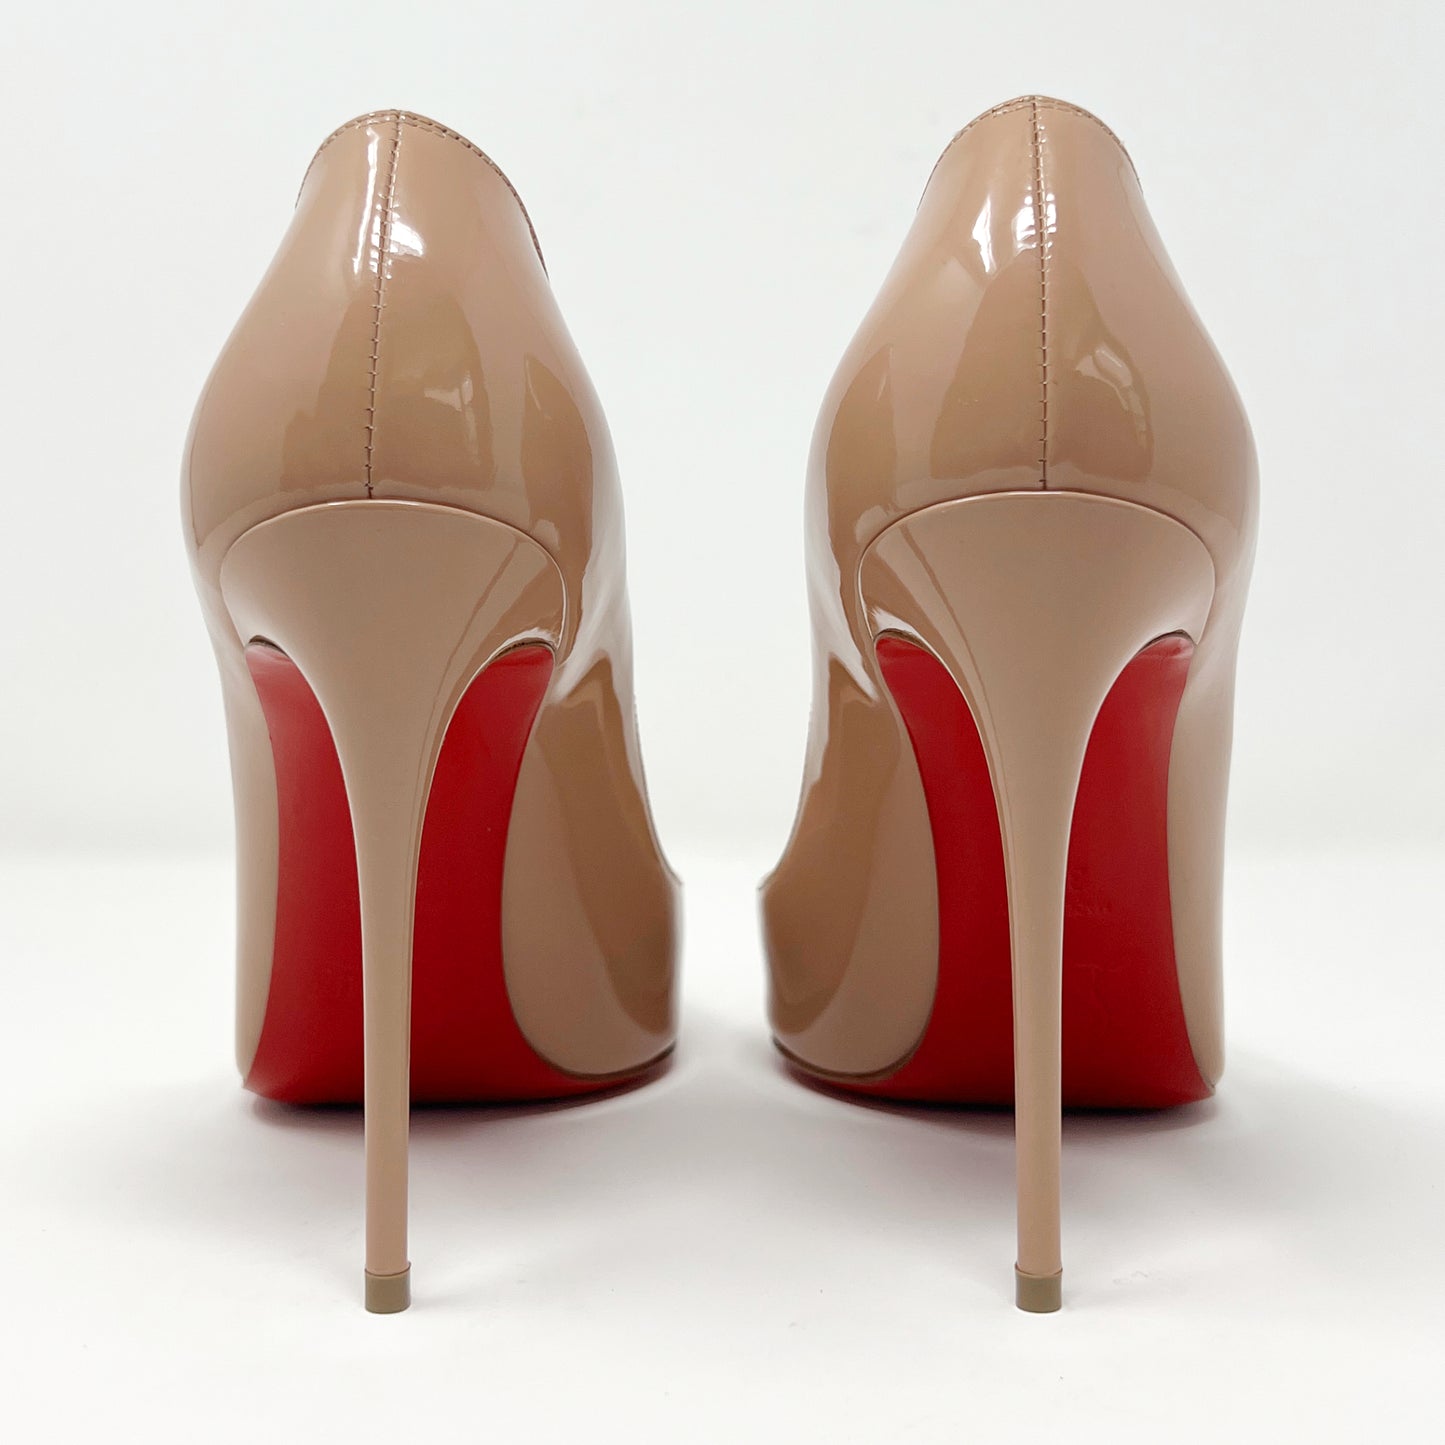 Christian Louboutin Pigalle Follies Tan Nude Patent Leather Pointed Pumps Heels